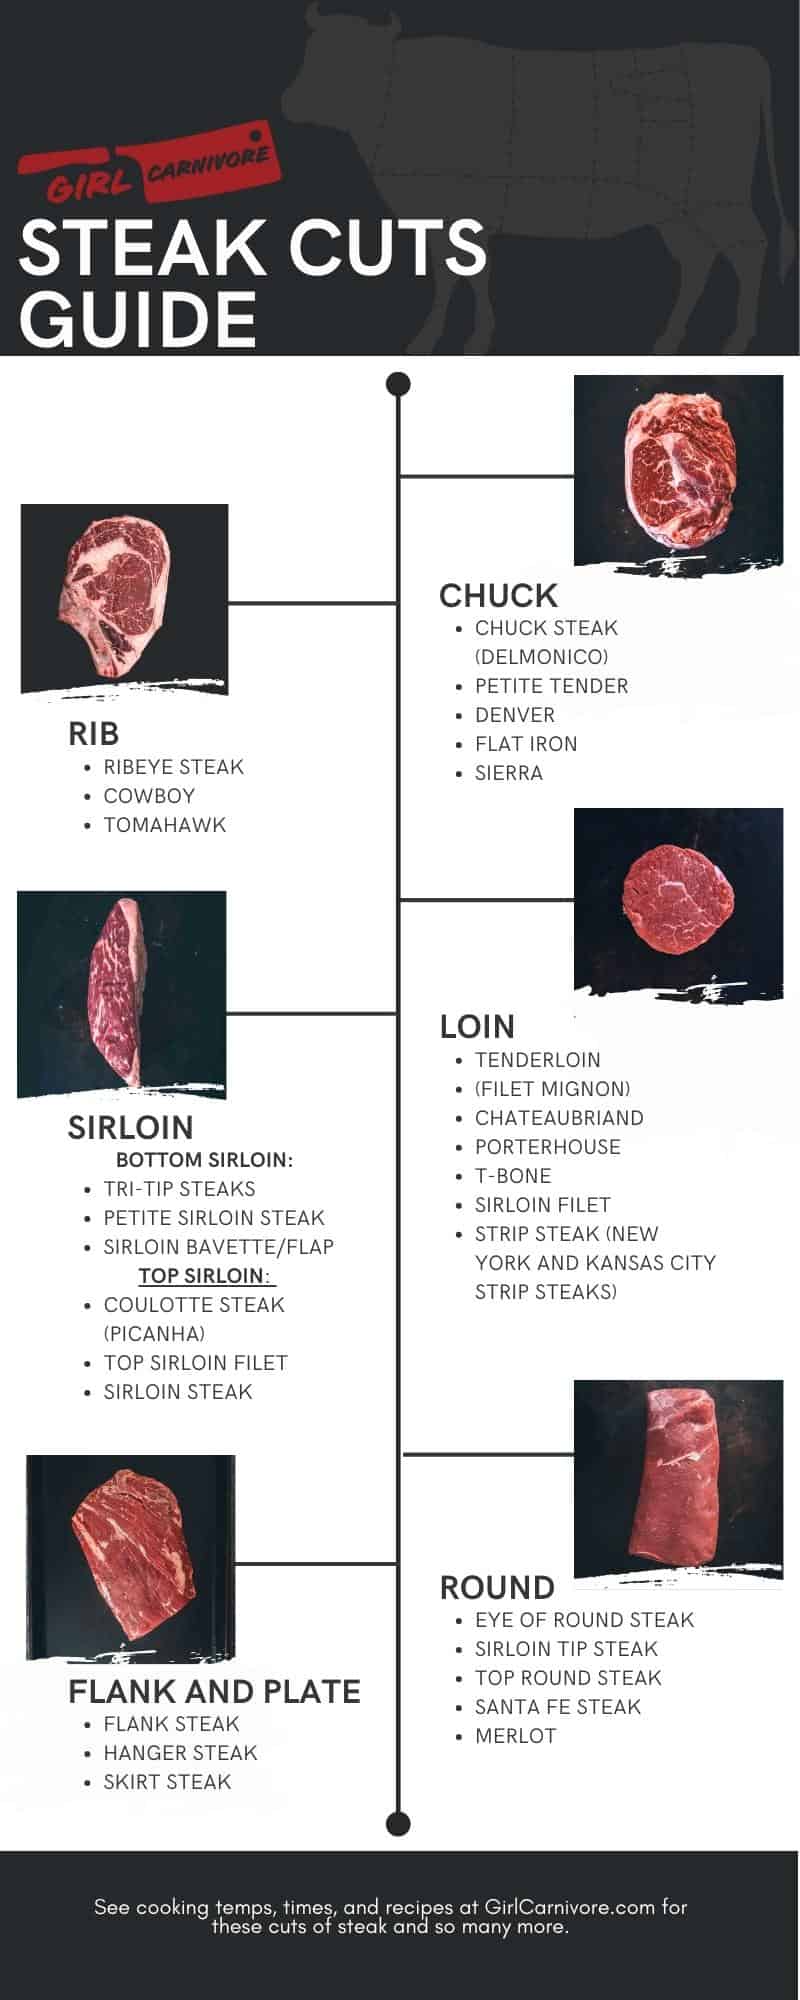 Infographic for steak cuts divided by primal.